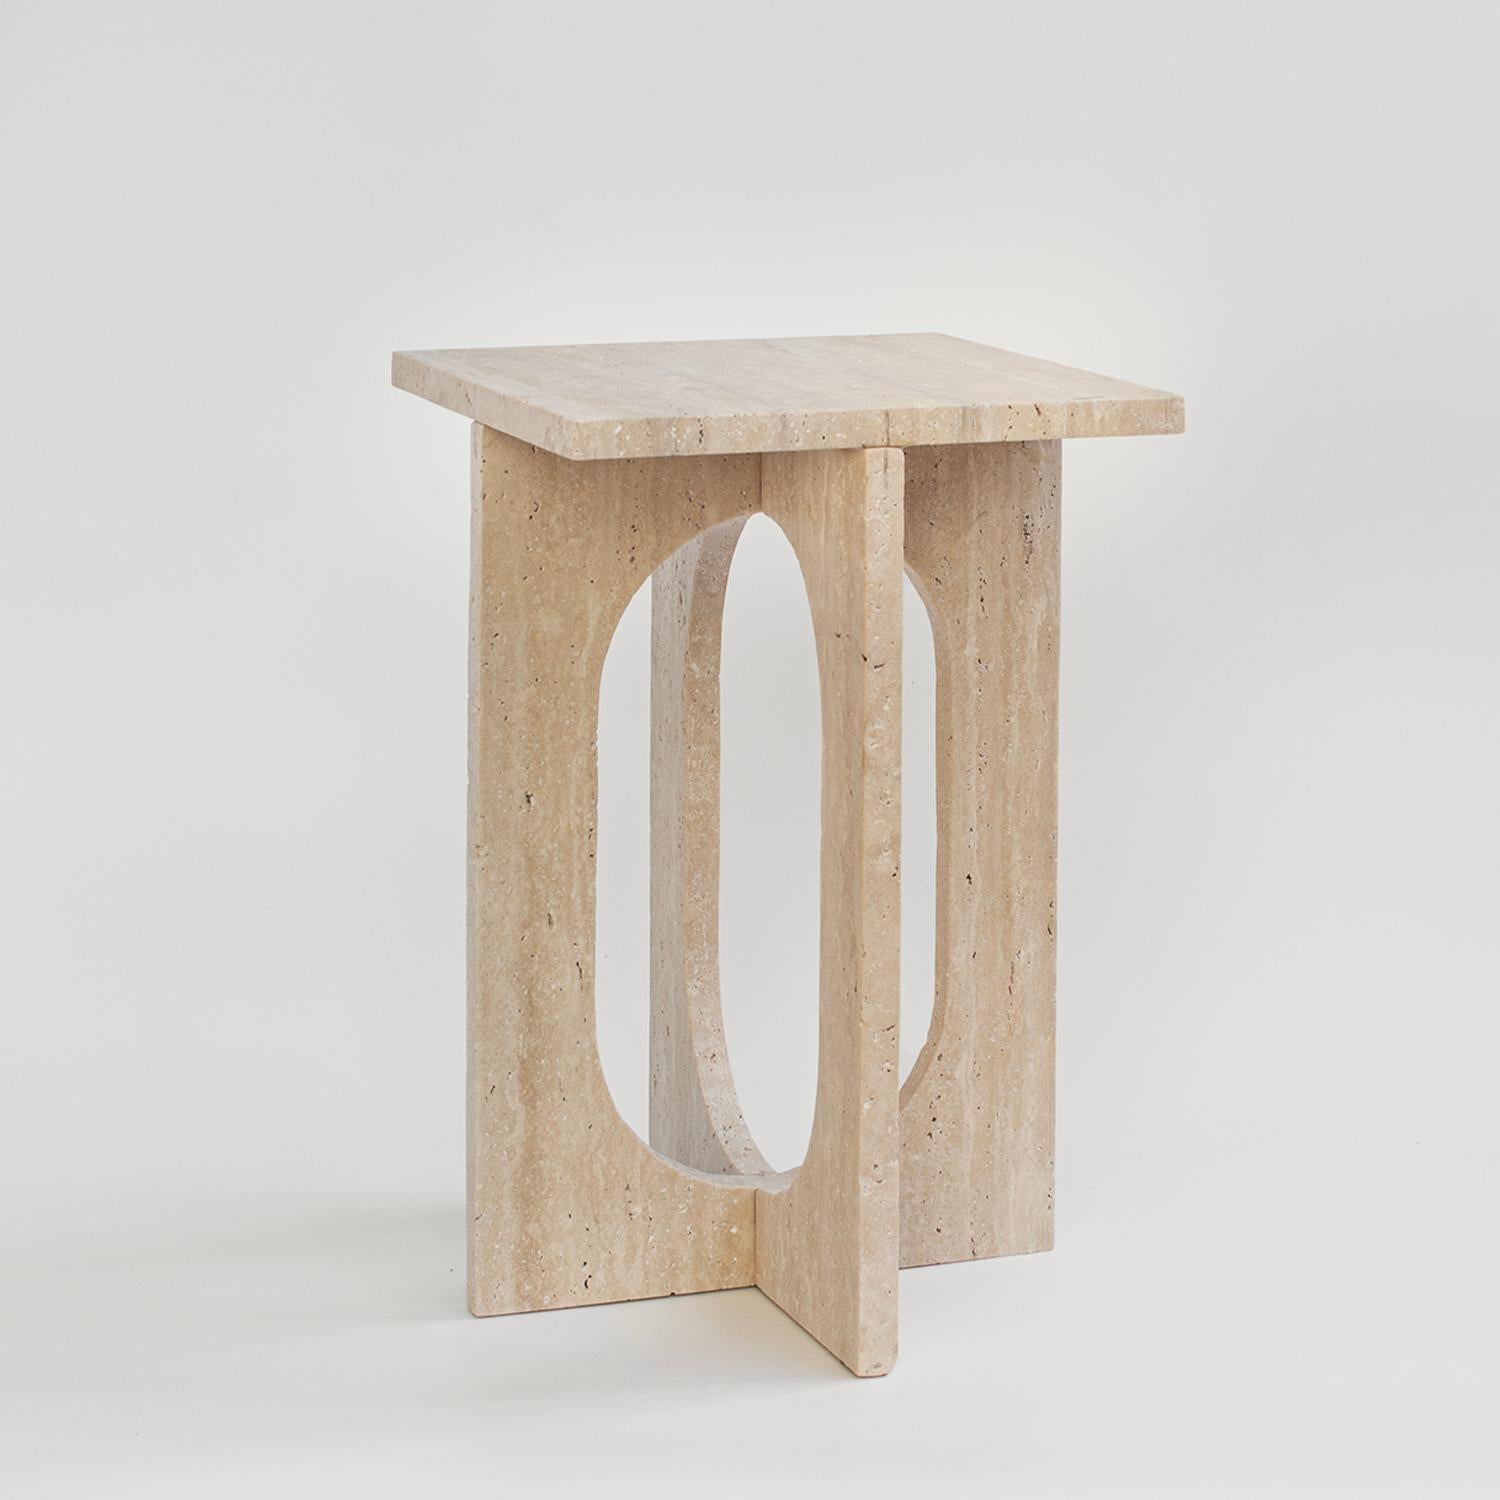 BOND Side Table in Travertine -  Bond Side Table evokes simplicity with its modern, clean design. Crafted from honed travertine, this piece is a stylish addition to any space with its sophisticated, clean lines and sleek construction. Use Bond as a